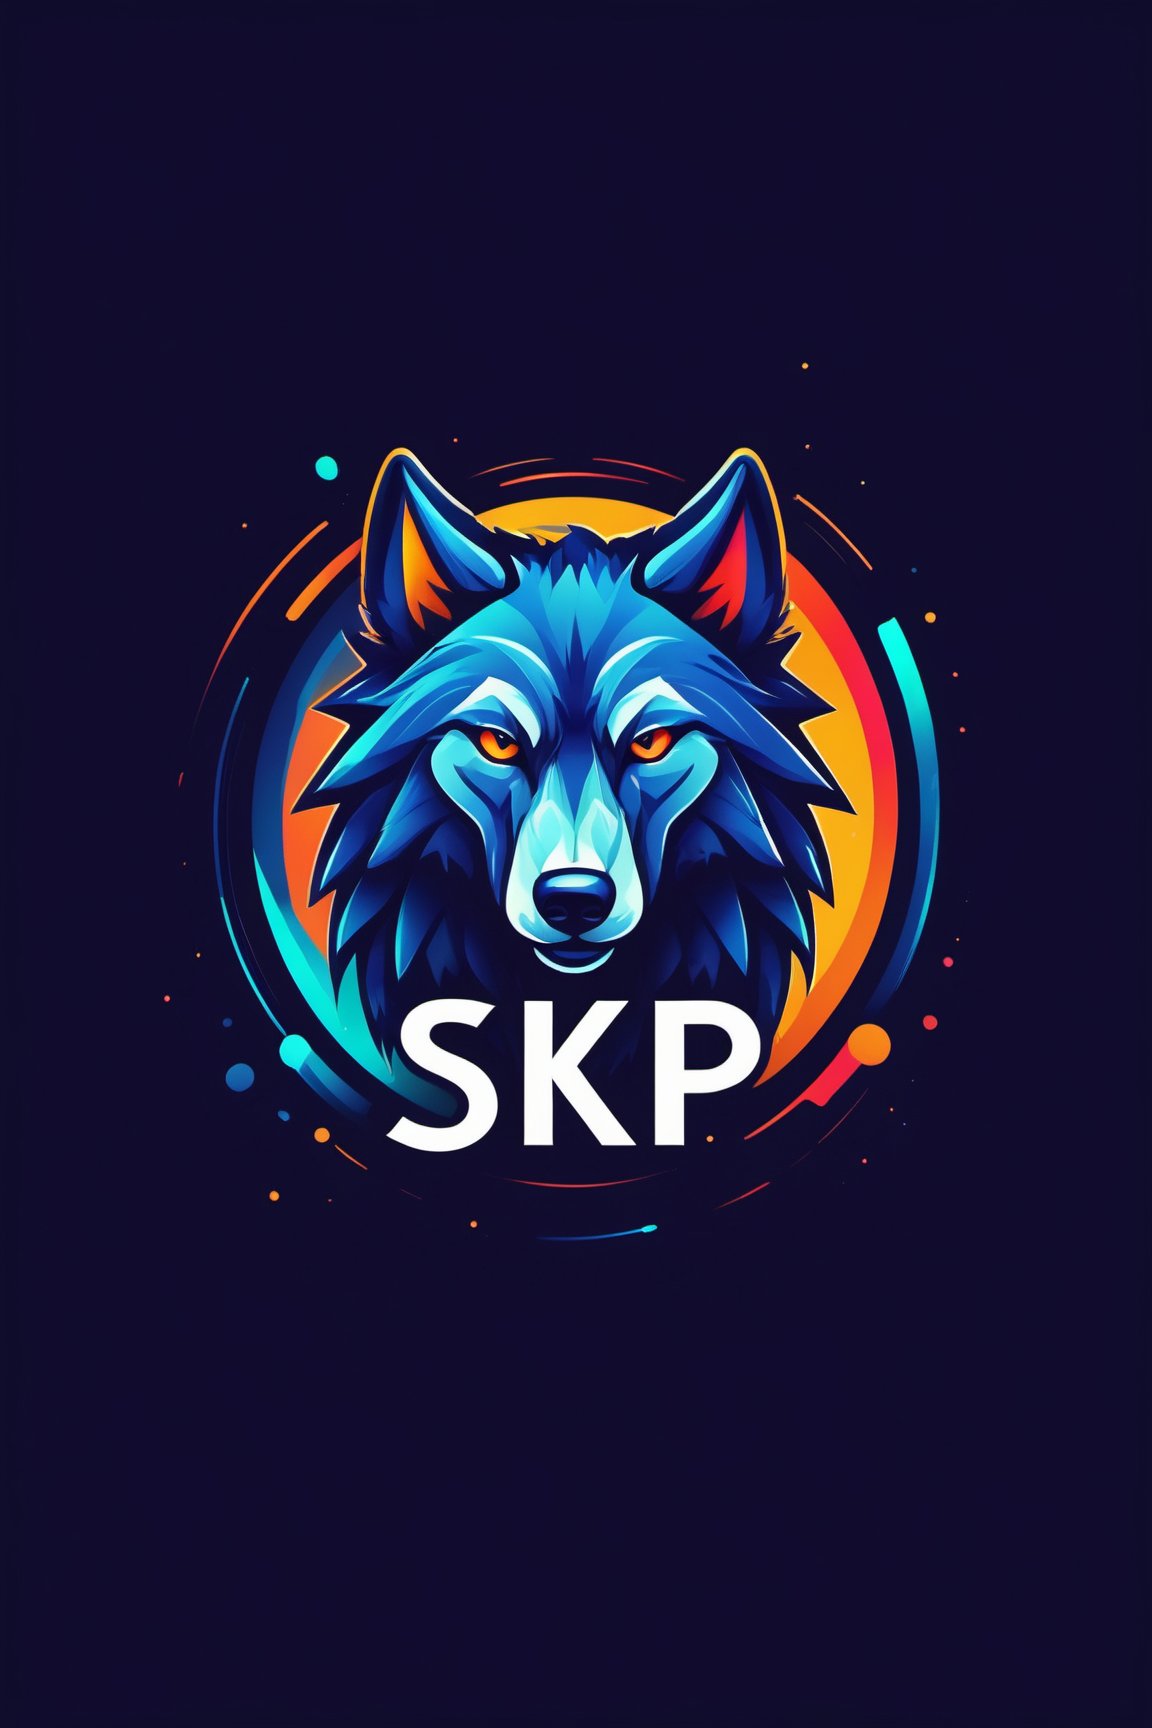 mordern logo of a wolf  with text "SKP" text logo, colourful, ,Text